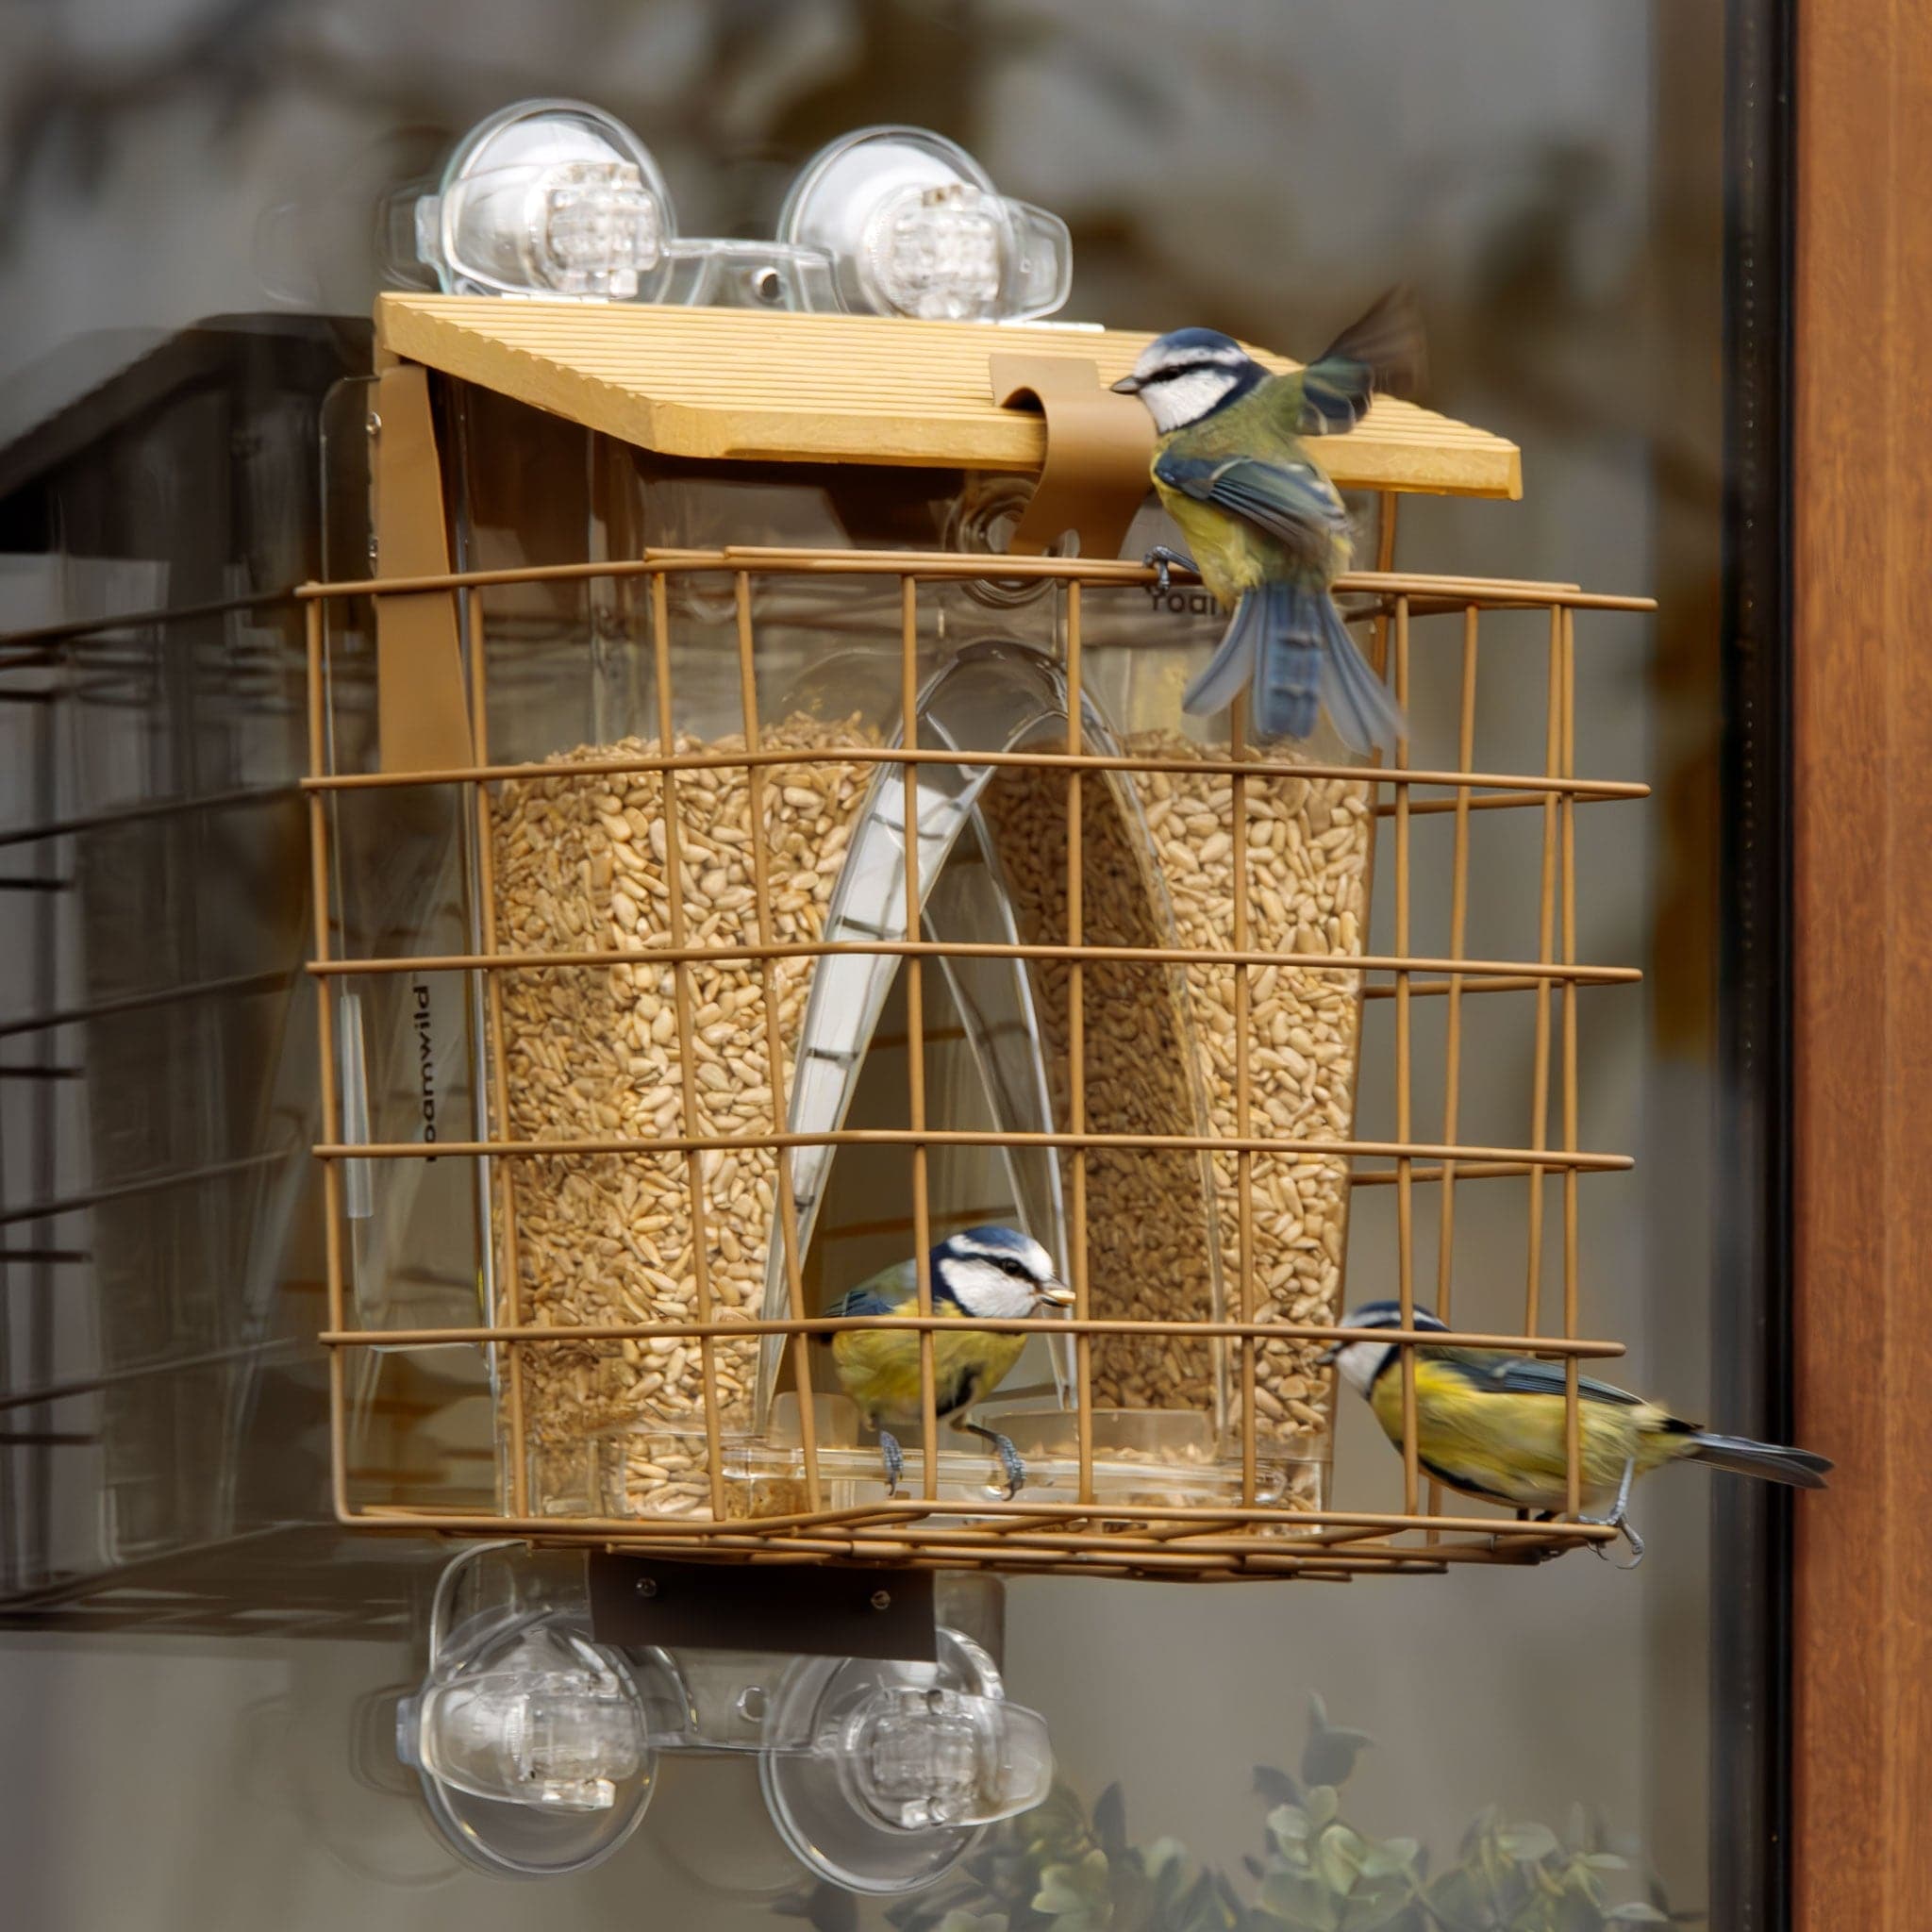 Roamwild Arch Window Feeder: Squirrel Proof Cage Accessory